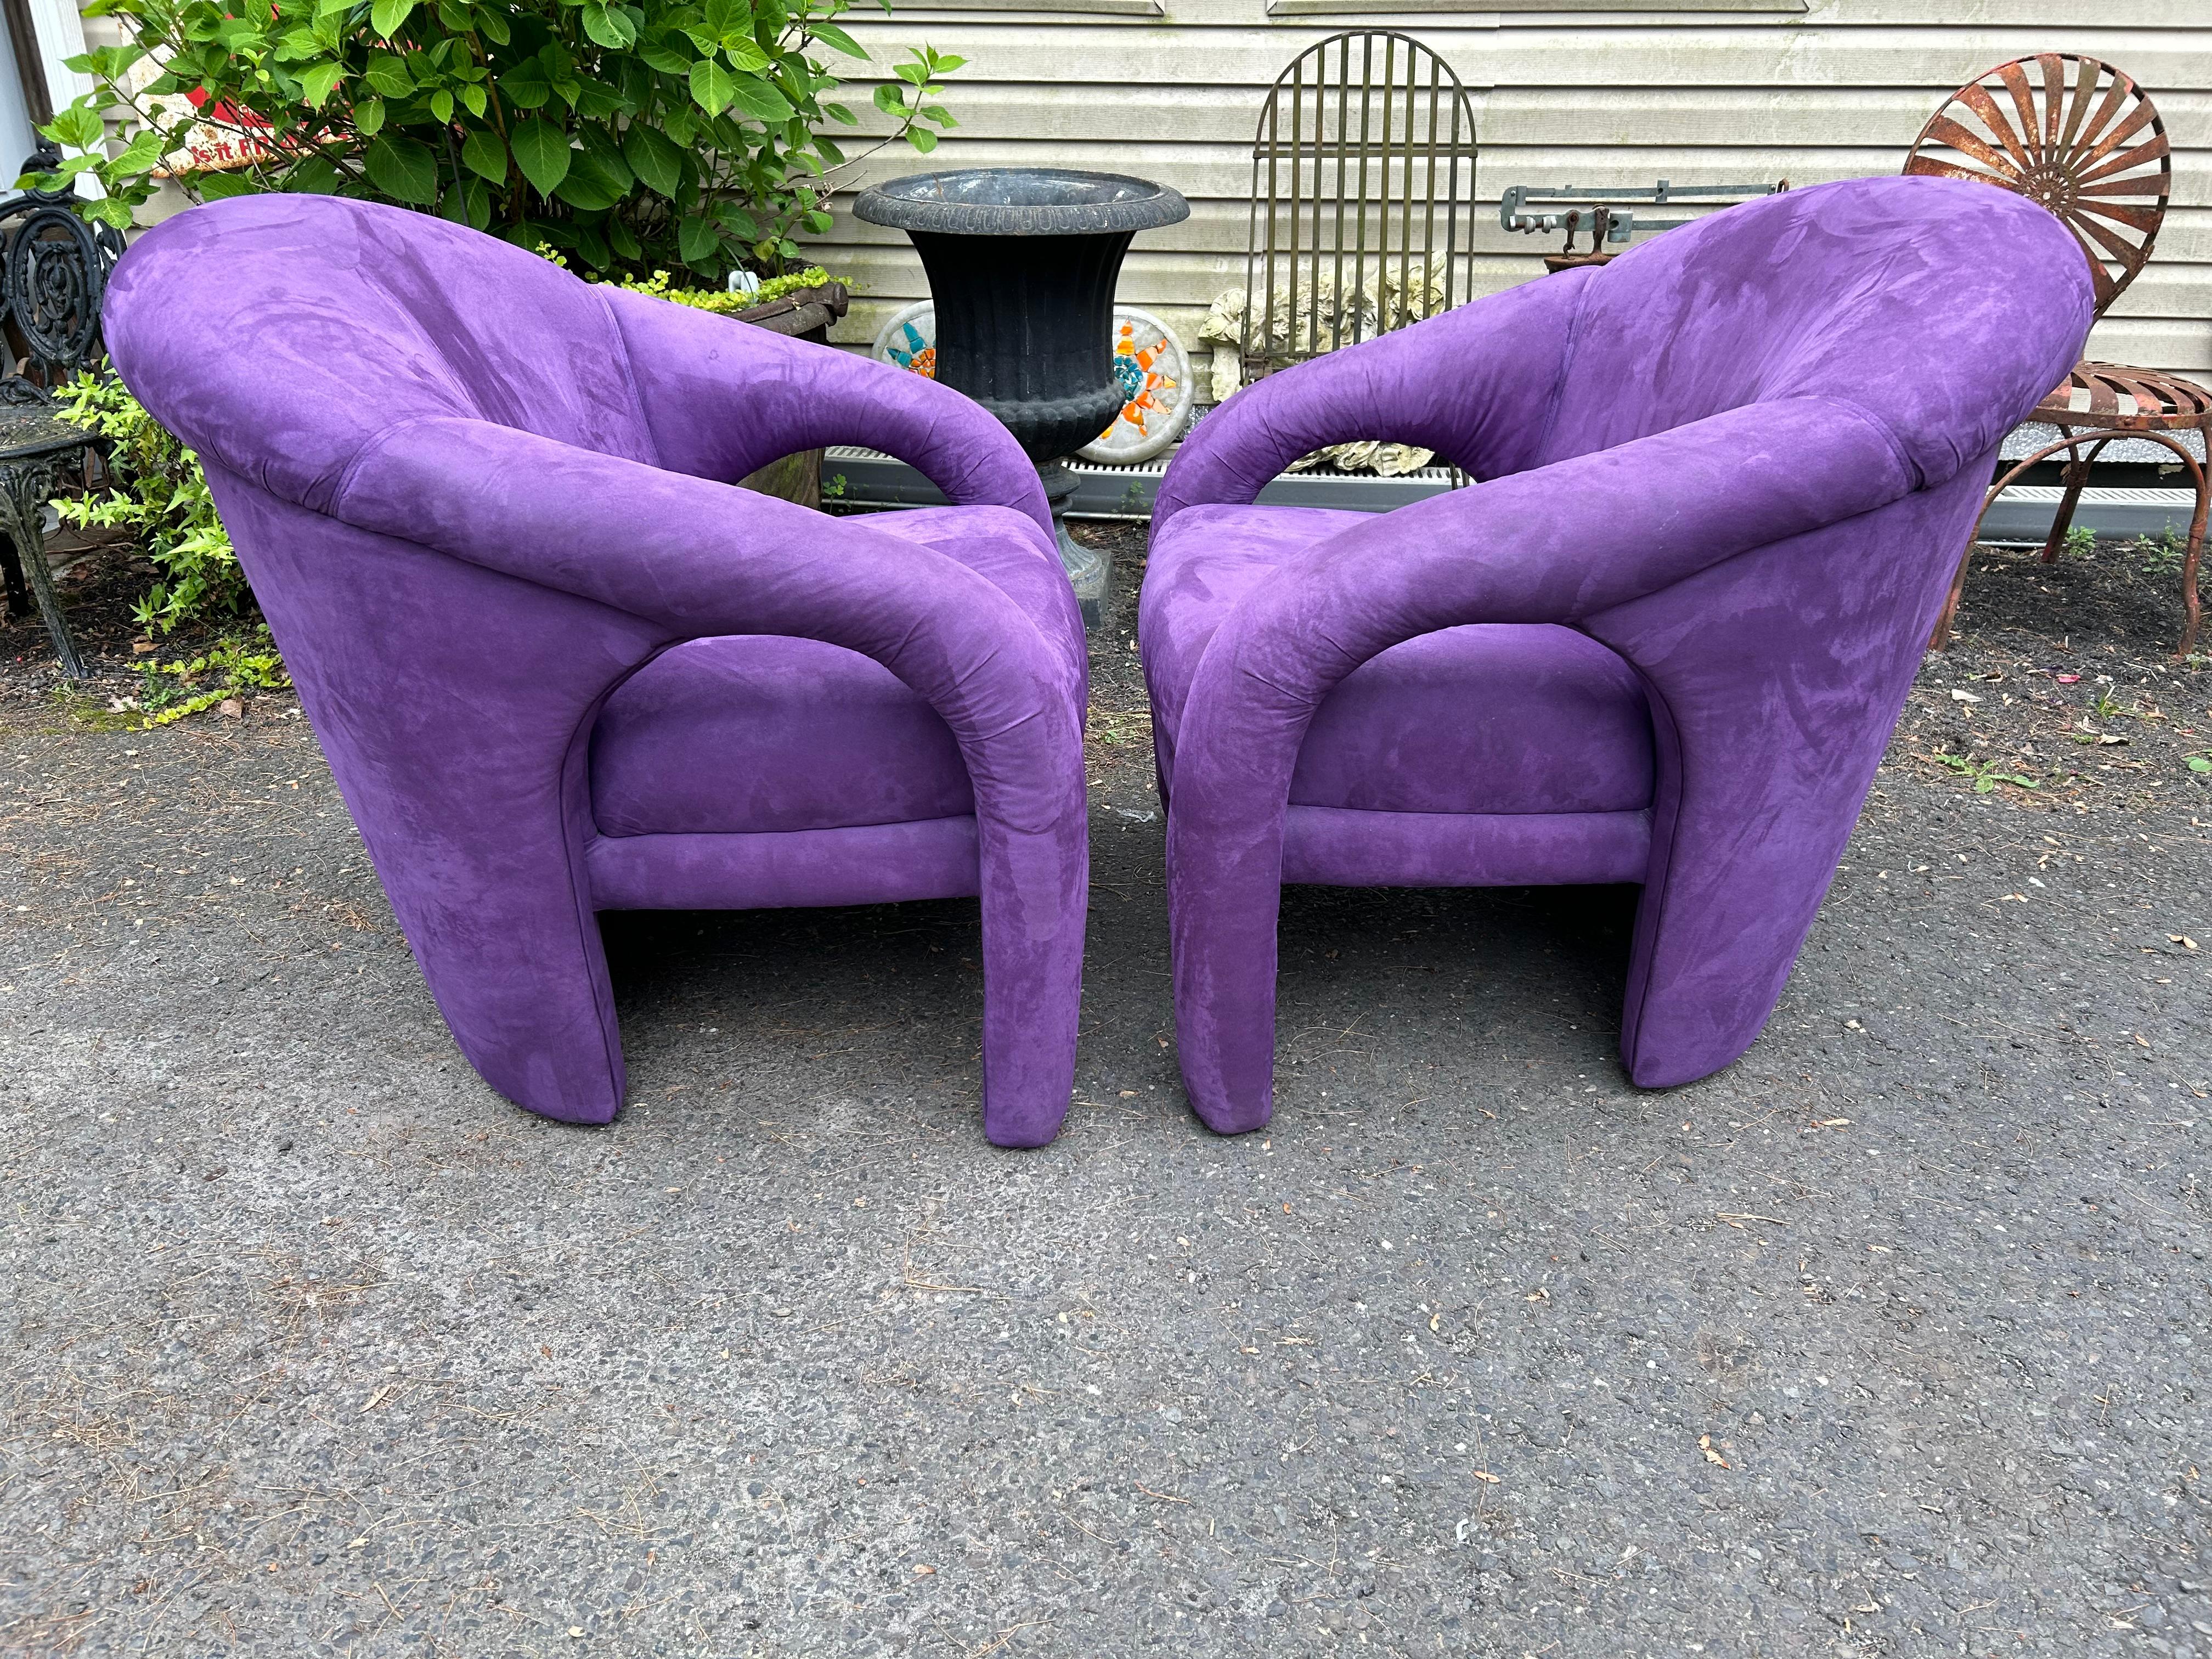 Sensational pair Vladimir Kagan sculptural Elephant Chairs.  This pair retains their original purple ultra-suede with some signs of wear-cleaning recommended.  They measure 31